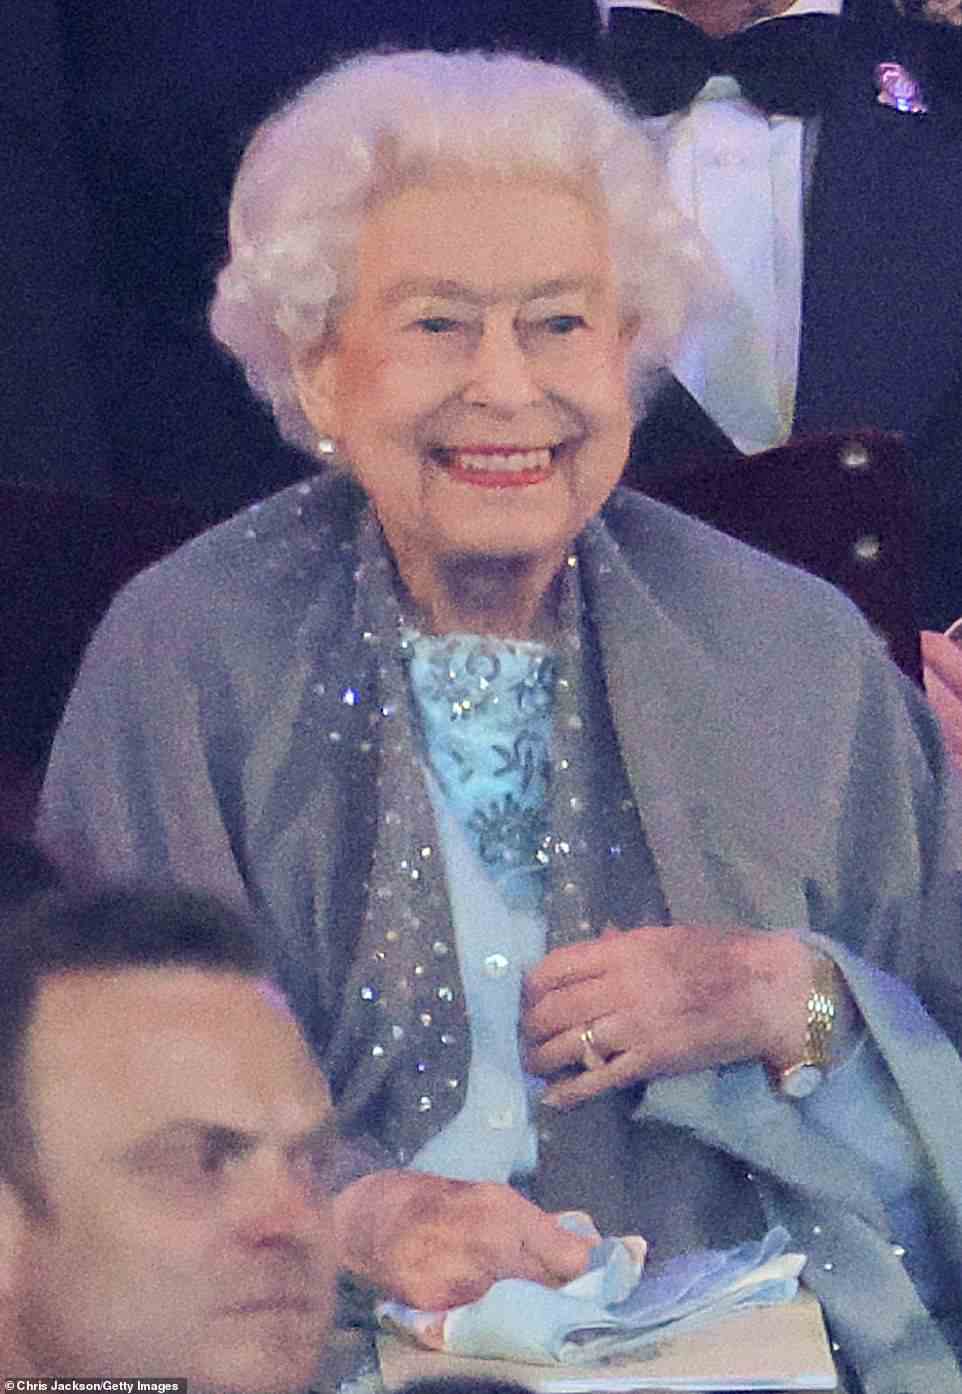 Queen Elizabeth II during the 'A Gallop Through History' performance as part of the official celebrations for the monarch's Platinum Jubilee